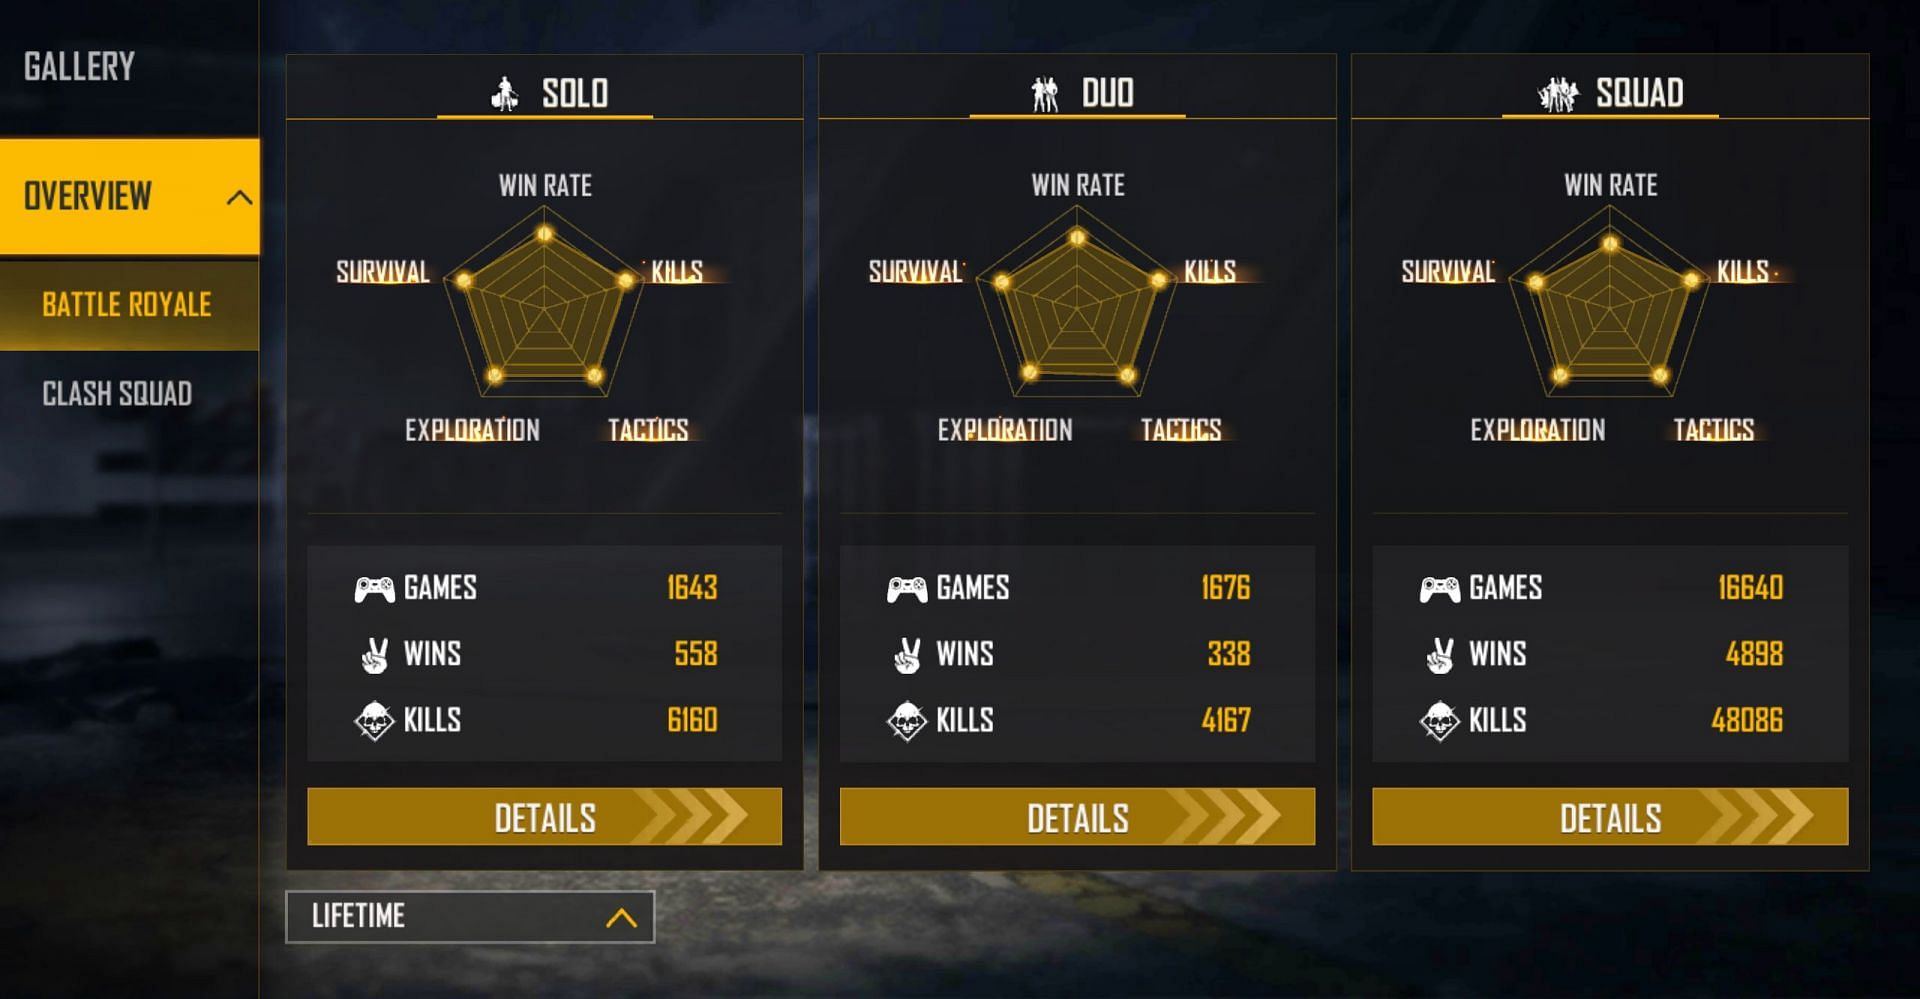 Daddy Calling has 16640 squad matches against his name (Image via Free Fire)